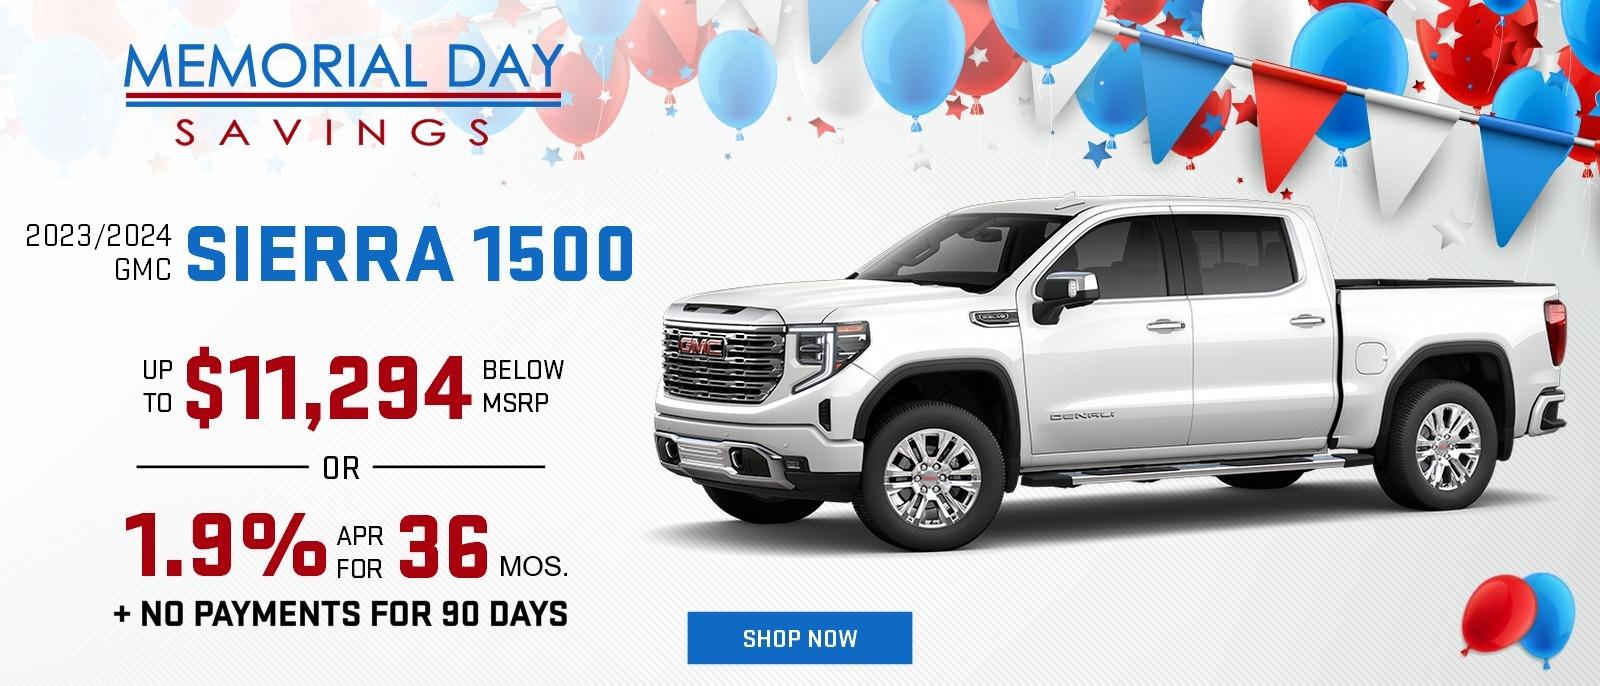 Memorial Day Savings
2023/2024 GMC Sierra 1500
up to $11,294 below MSRP
or
1.9% APR for 36 months + NO PAYMENTS FOR 90 DAYS
Shop Now